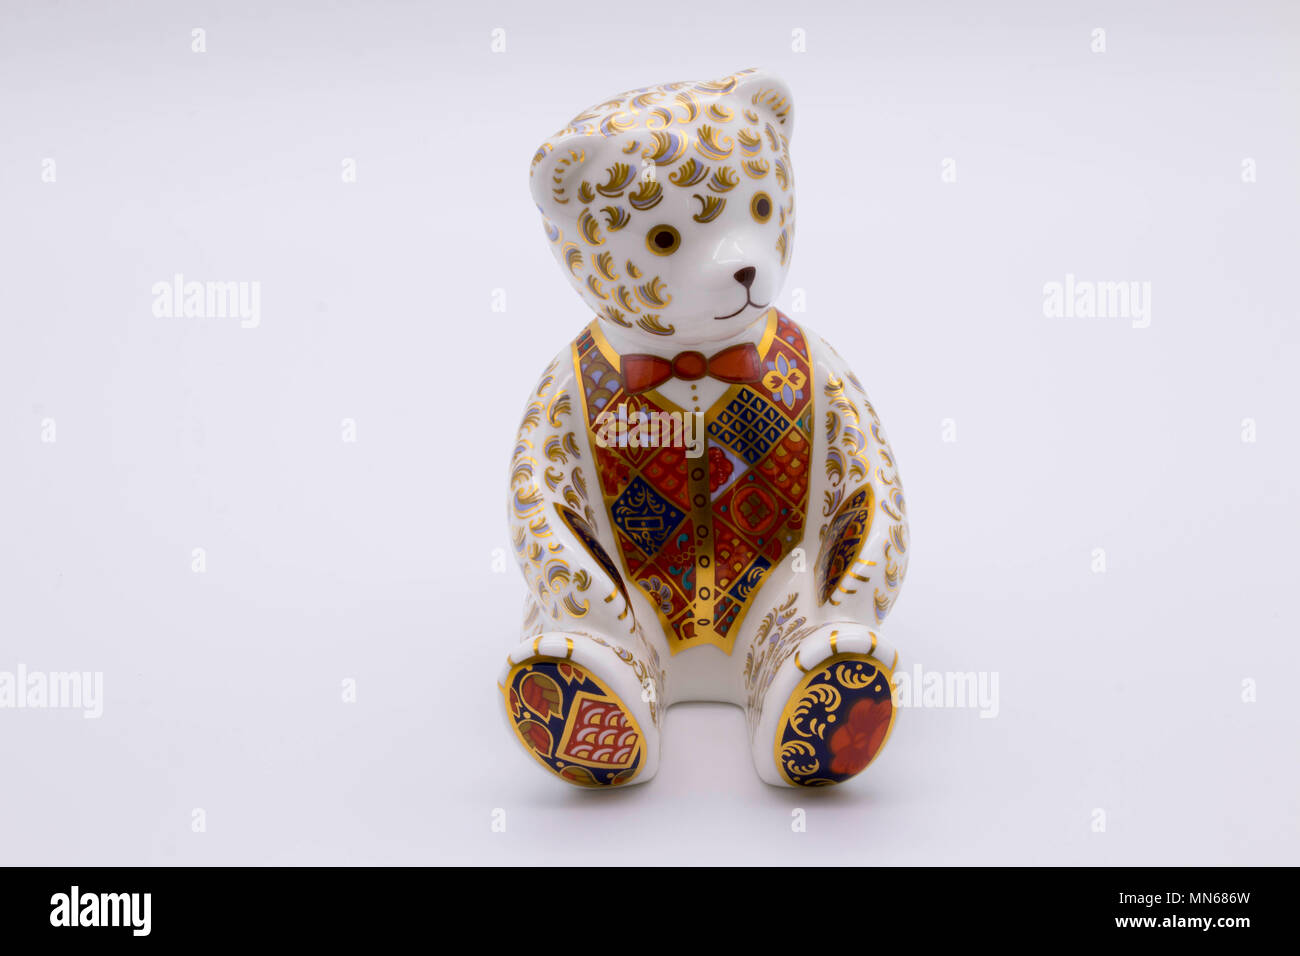 Royal Crown Derby bone china paperweigh of a limited edition teddy bear uk Stock Photo